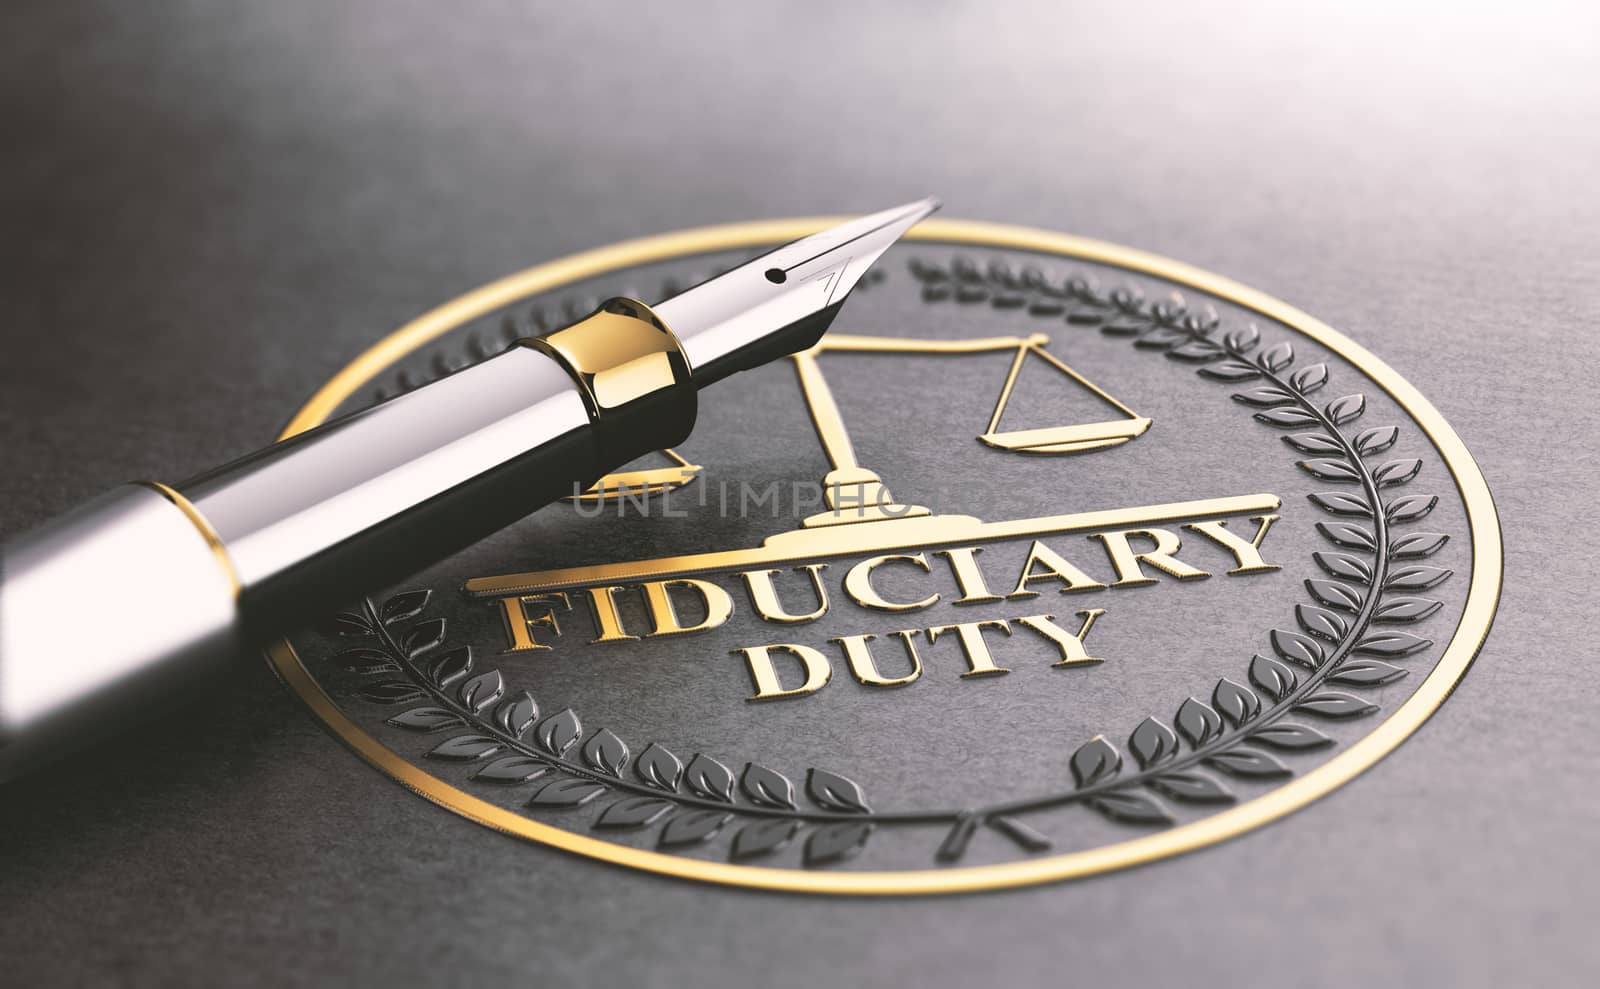 Fiduciary Duty, Legal Responsibilities by Olivier-Le-Moal